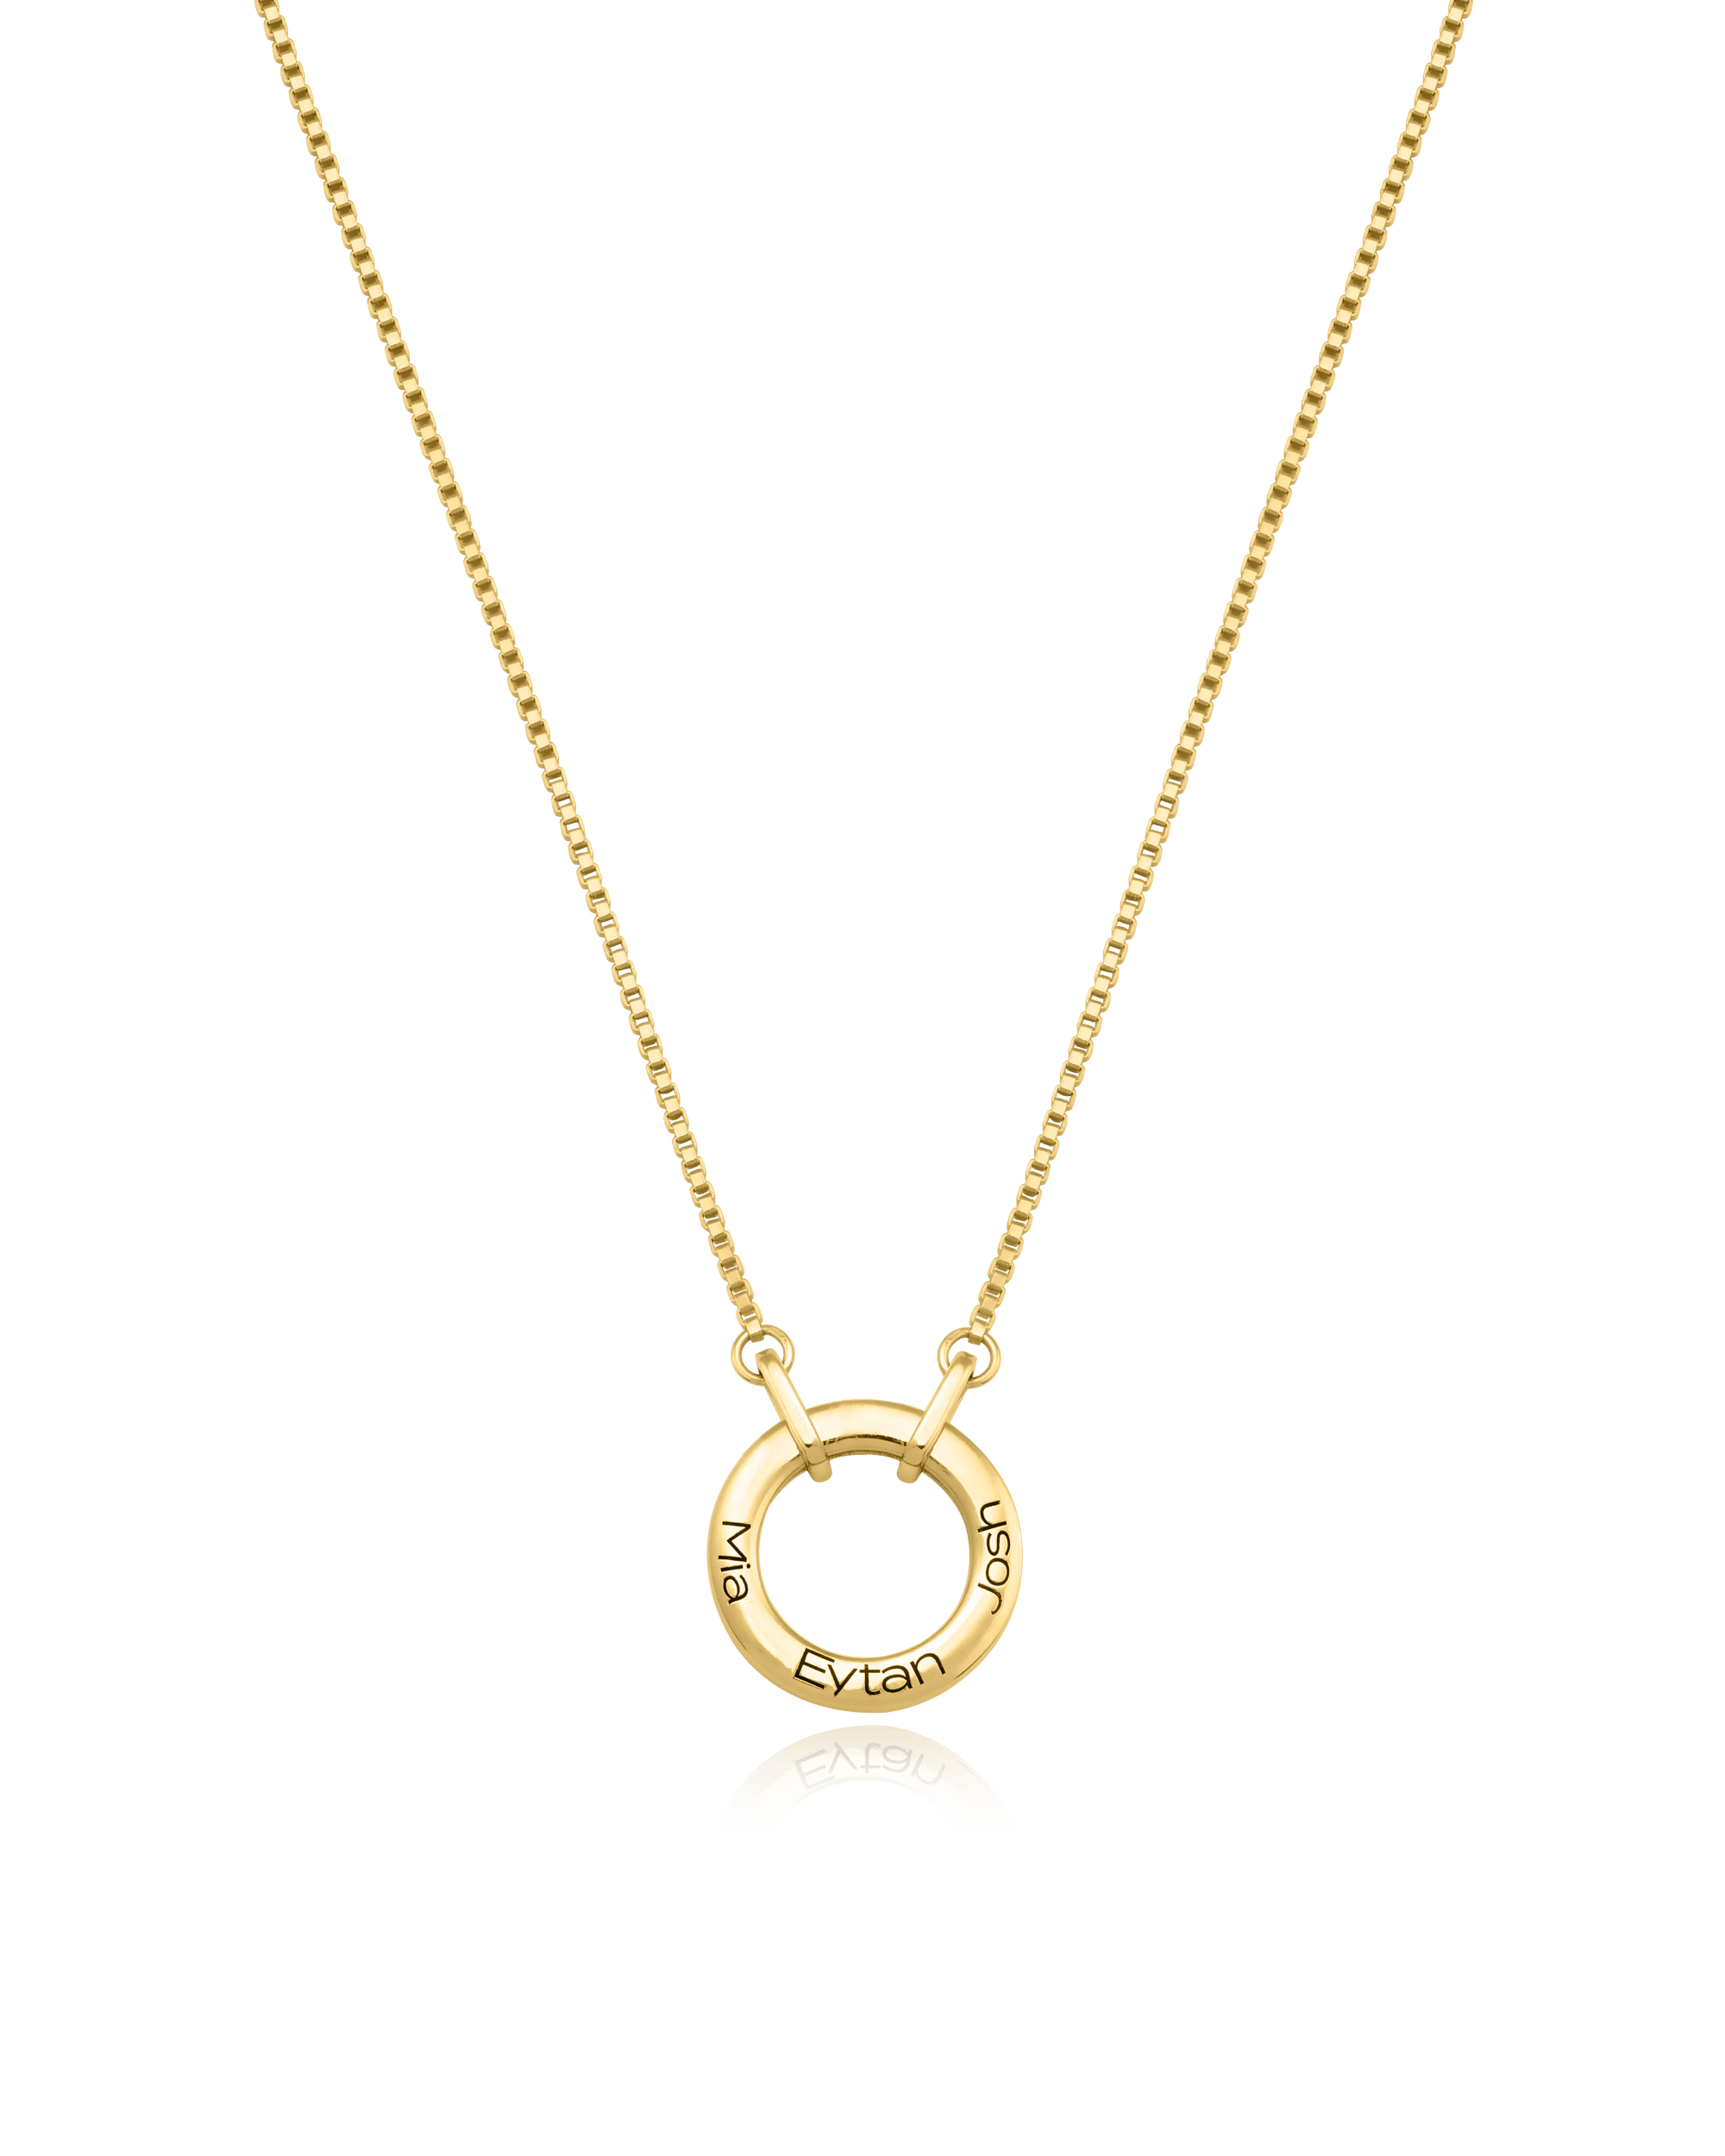 Pillow Pendant by George Rings - 12mm square 18k yellow gold